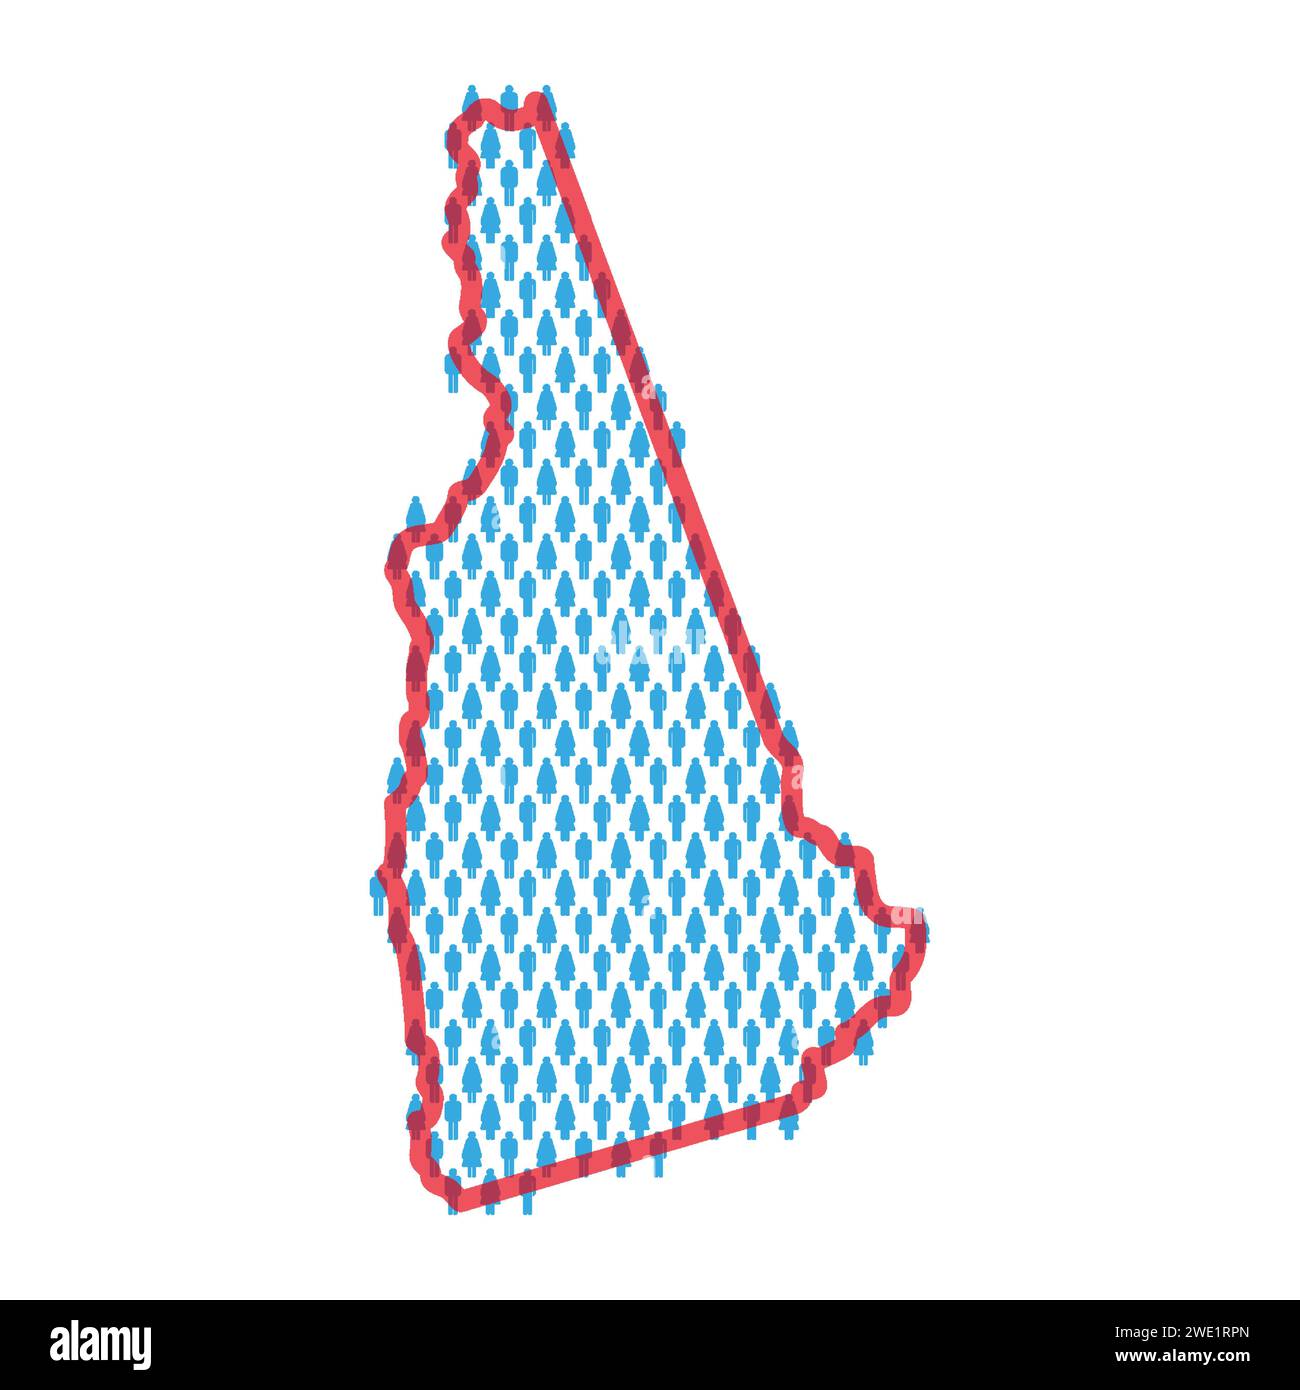 New Hampshire population map. Stick figures people map with bold red translucent state border. Pattern of men and women icons. Isolated vector illustr Stock Vector